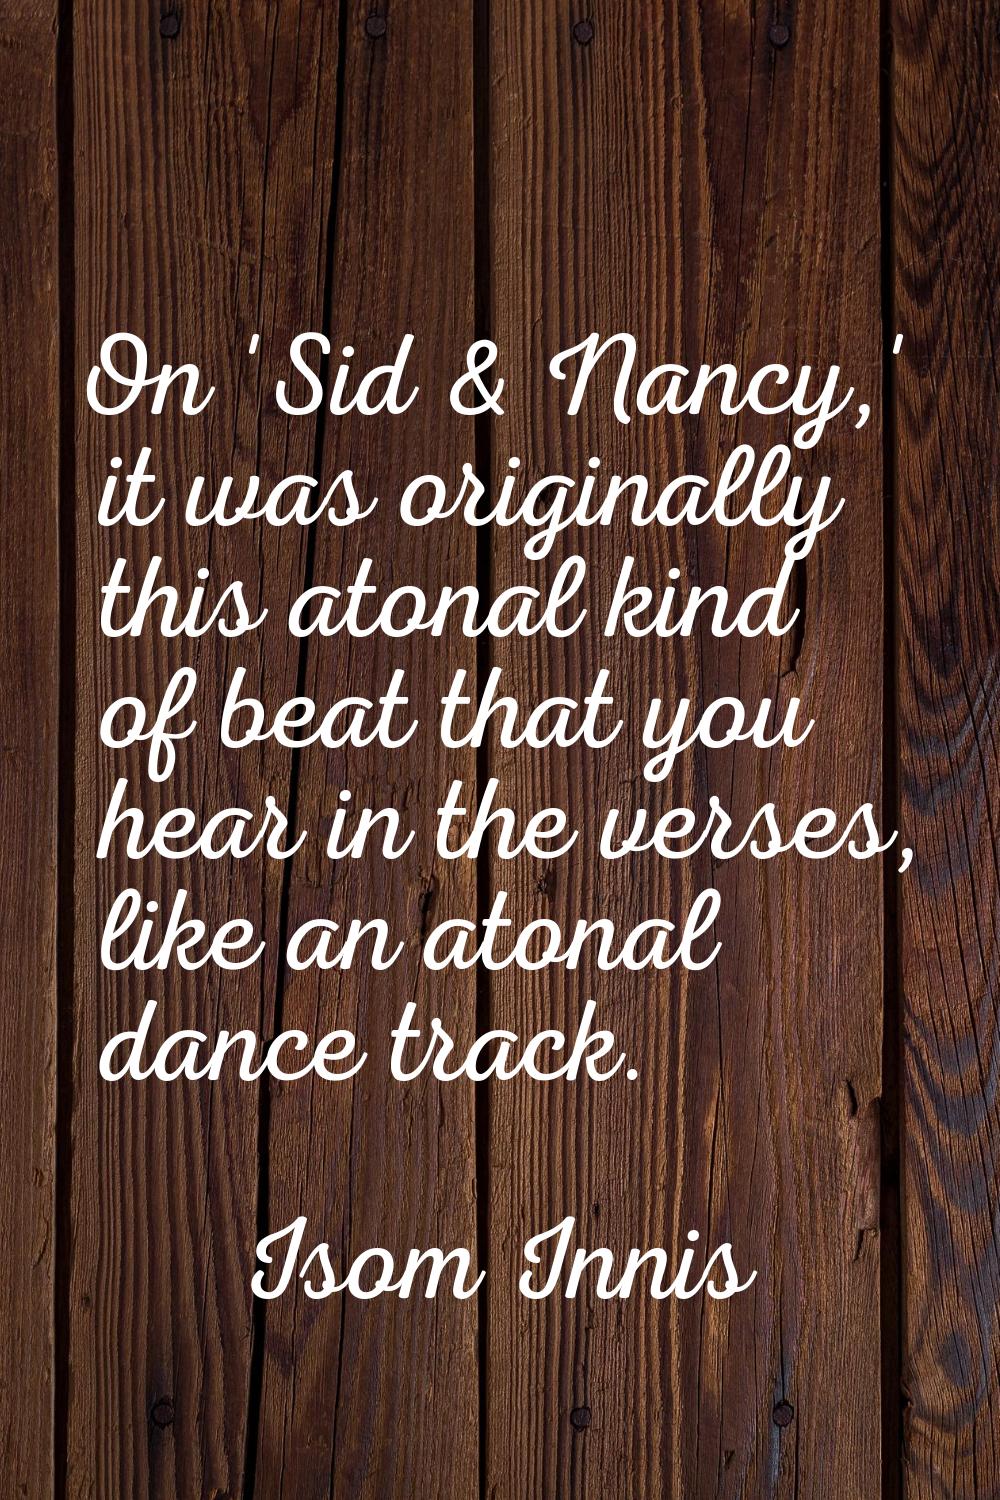 On 'Sid & Nancy,' it was originally this atonal kind of beat that you hear in the verses, like an a